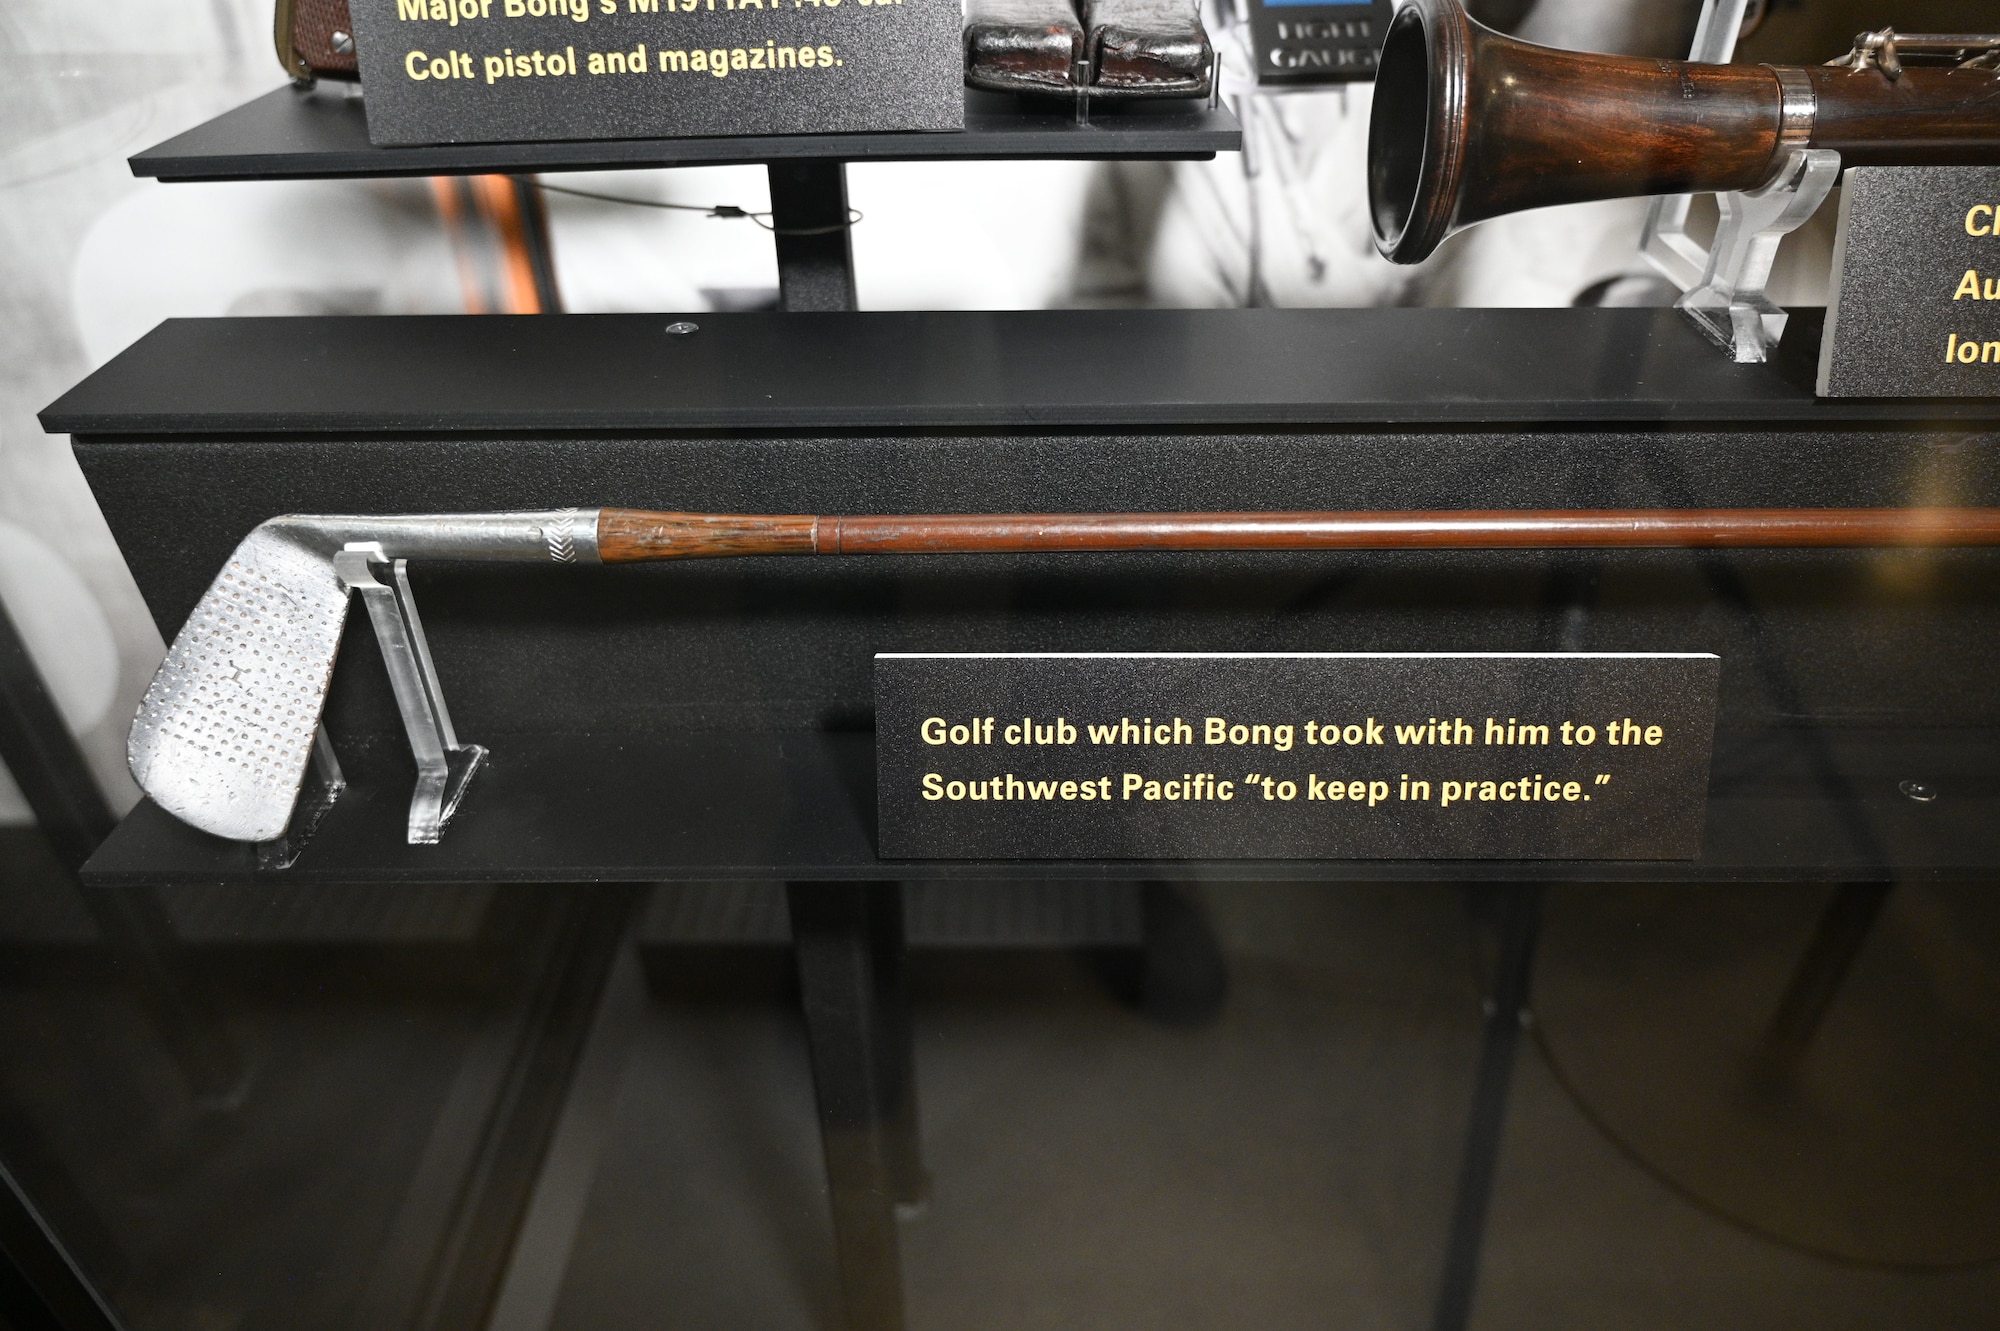 Golf club belonging to Maj. Richard I. Bong on display in the WWII Gallery at the National Museum of the U.S. Air Force.